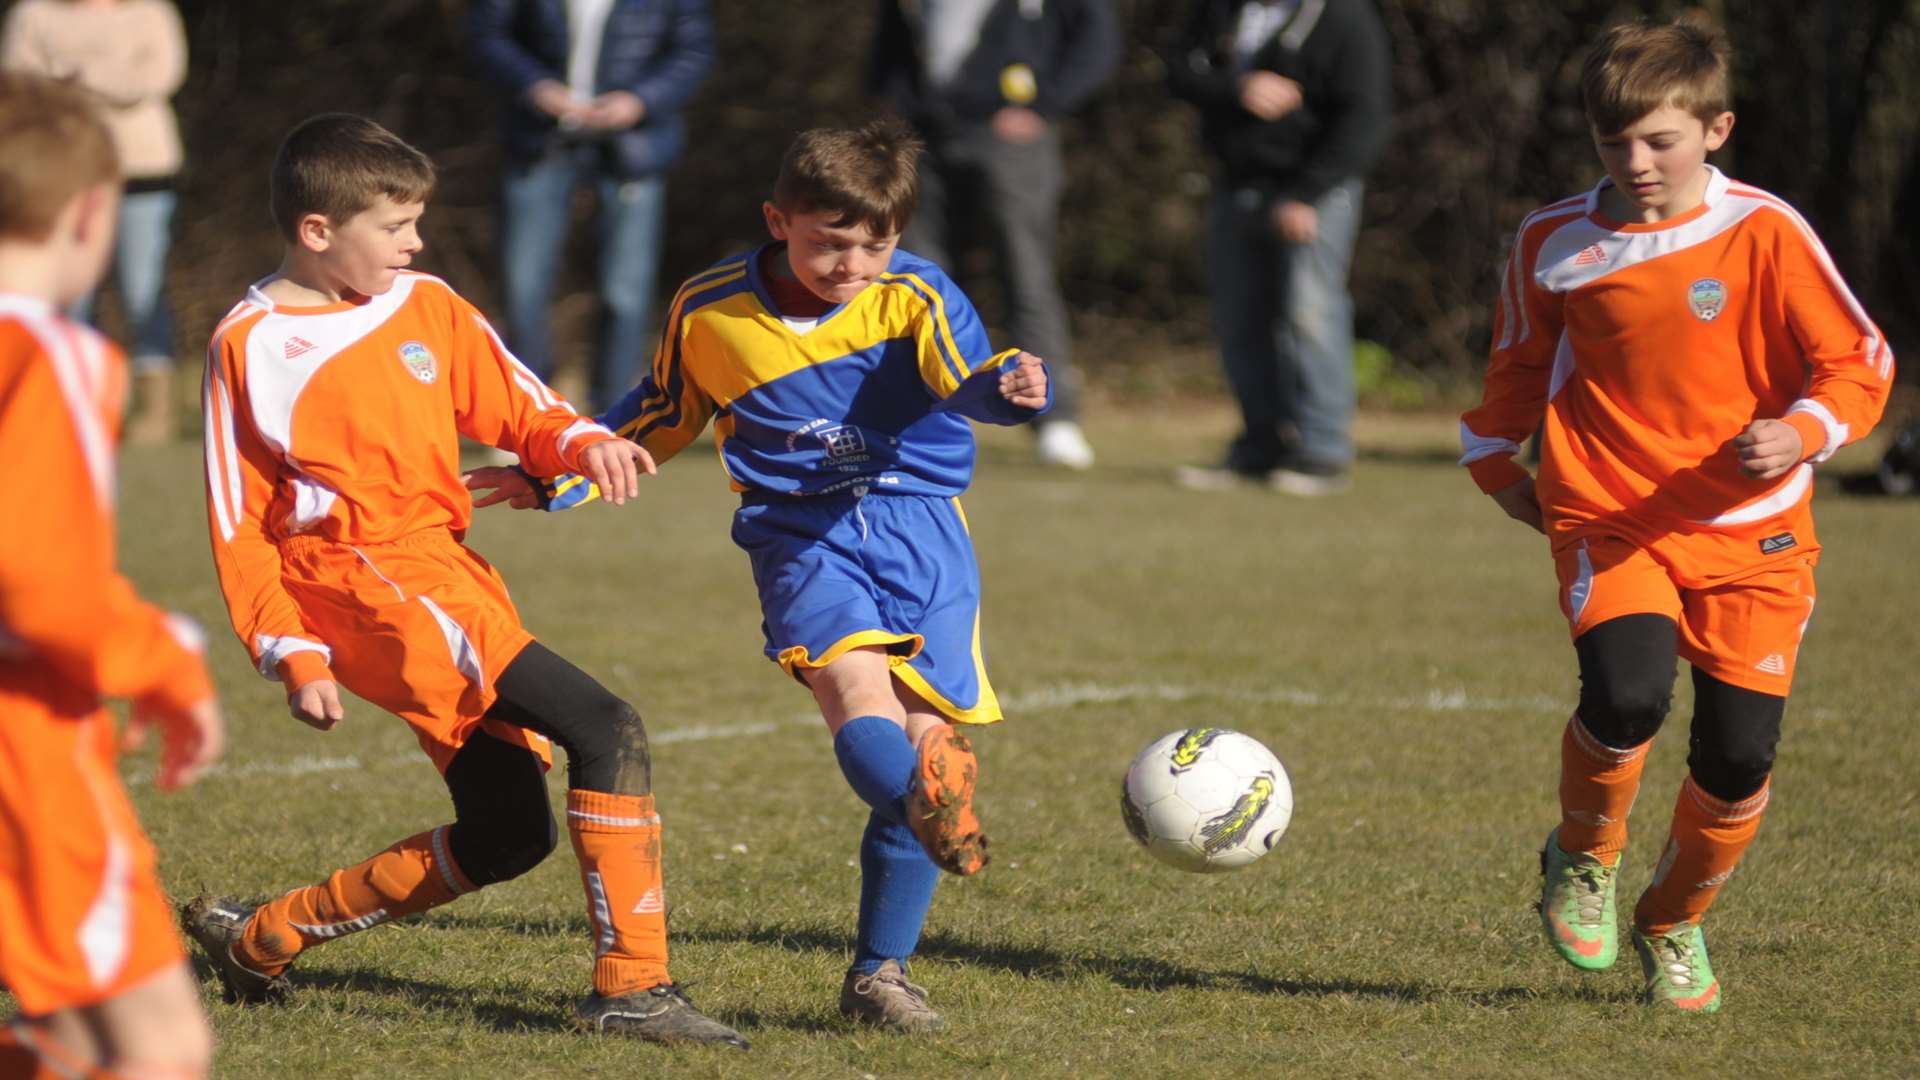 Sheerness East under-11s in possession against Cuxton 91 in Division 2 Picture: Steve Crispe